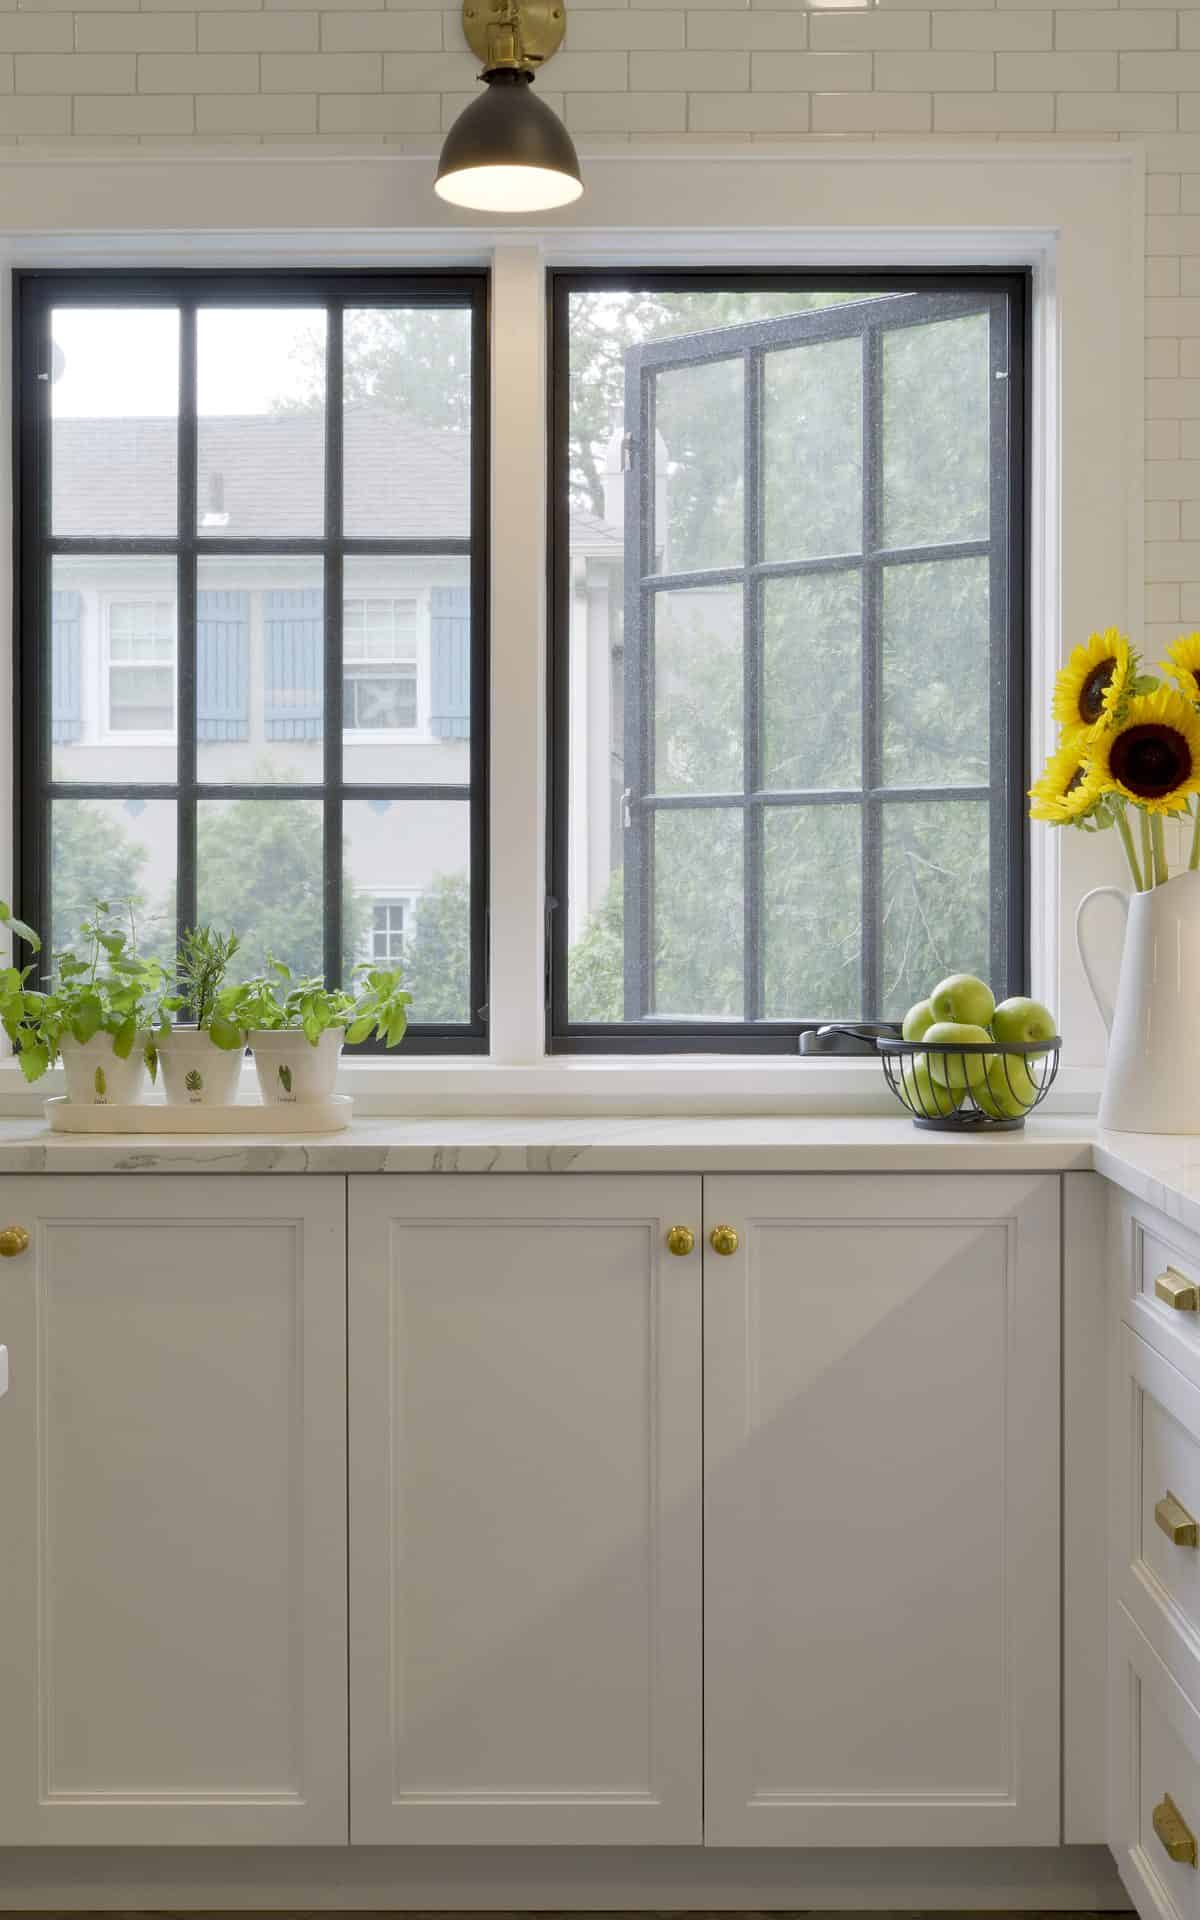 White kitchen with black window frames and white classic cabinetry.